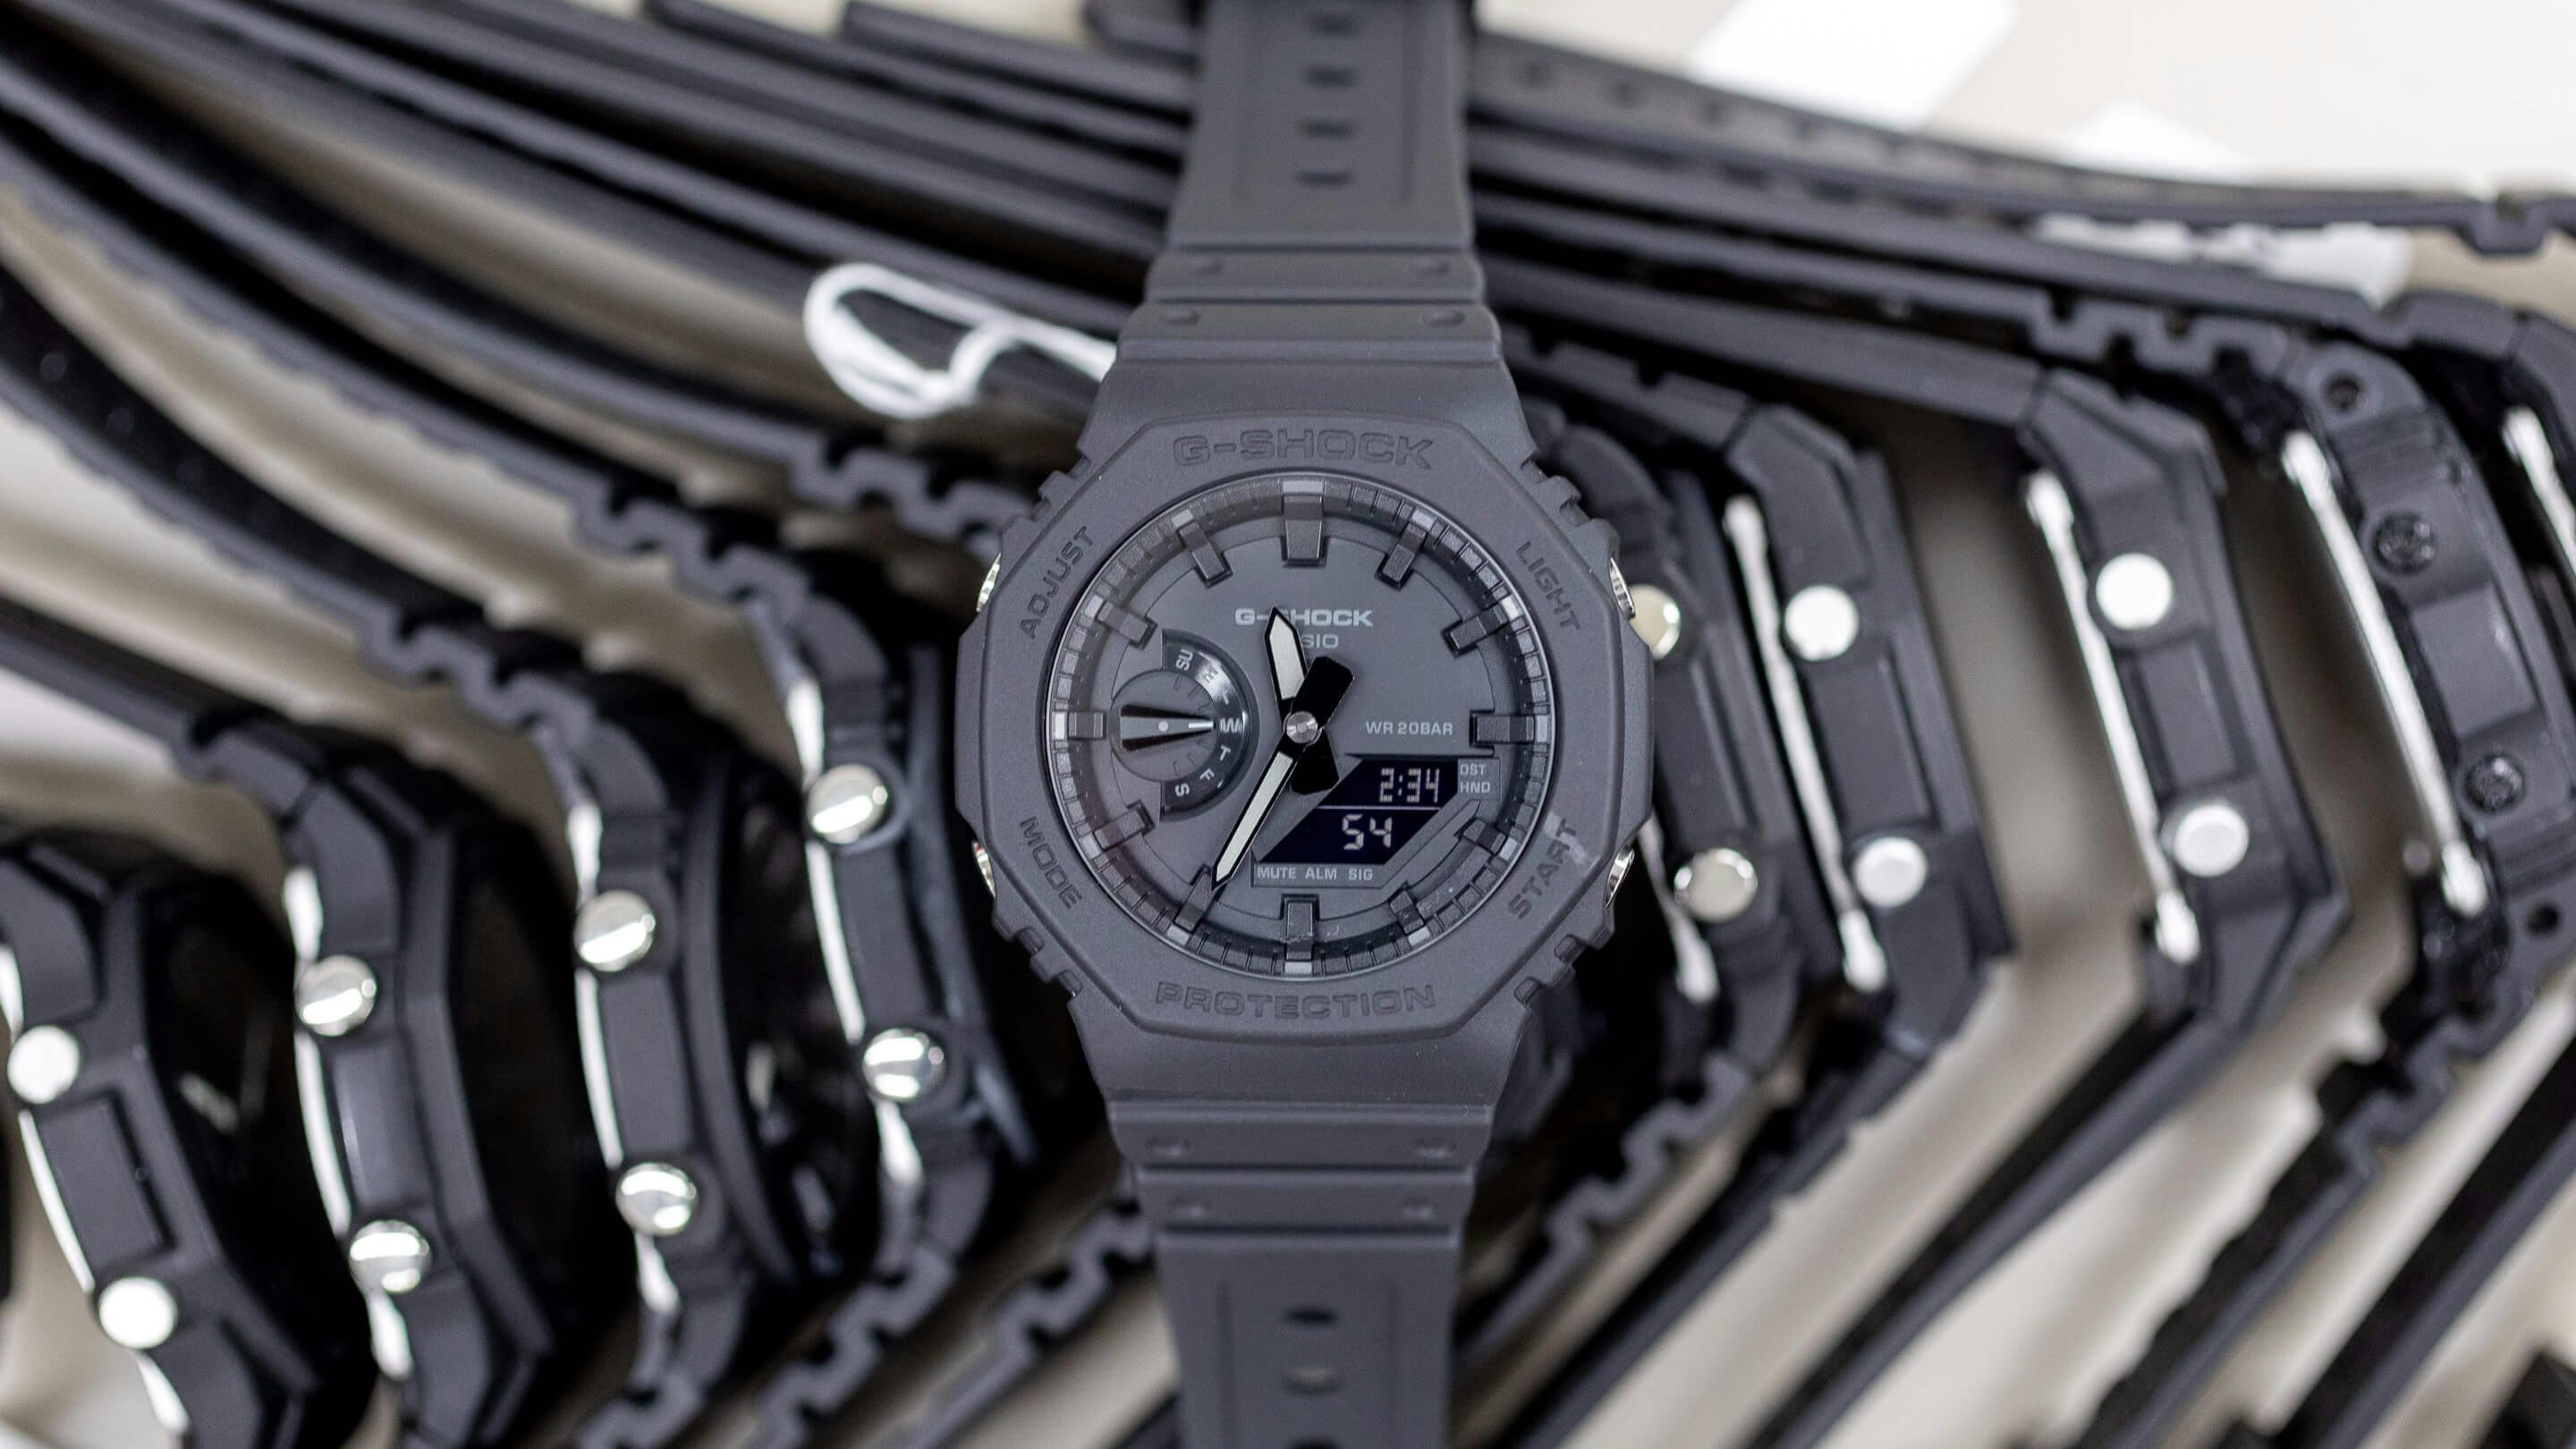 A New Generation Of Fashion-Forward Watches Have Arrived